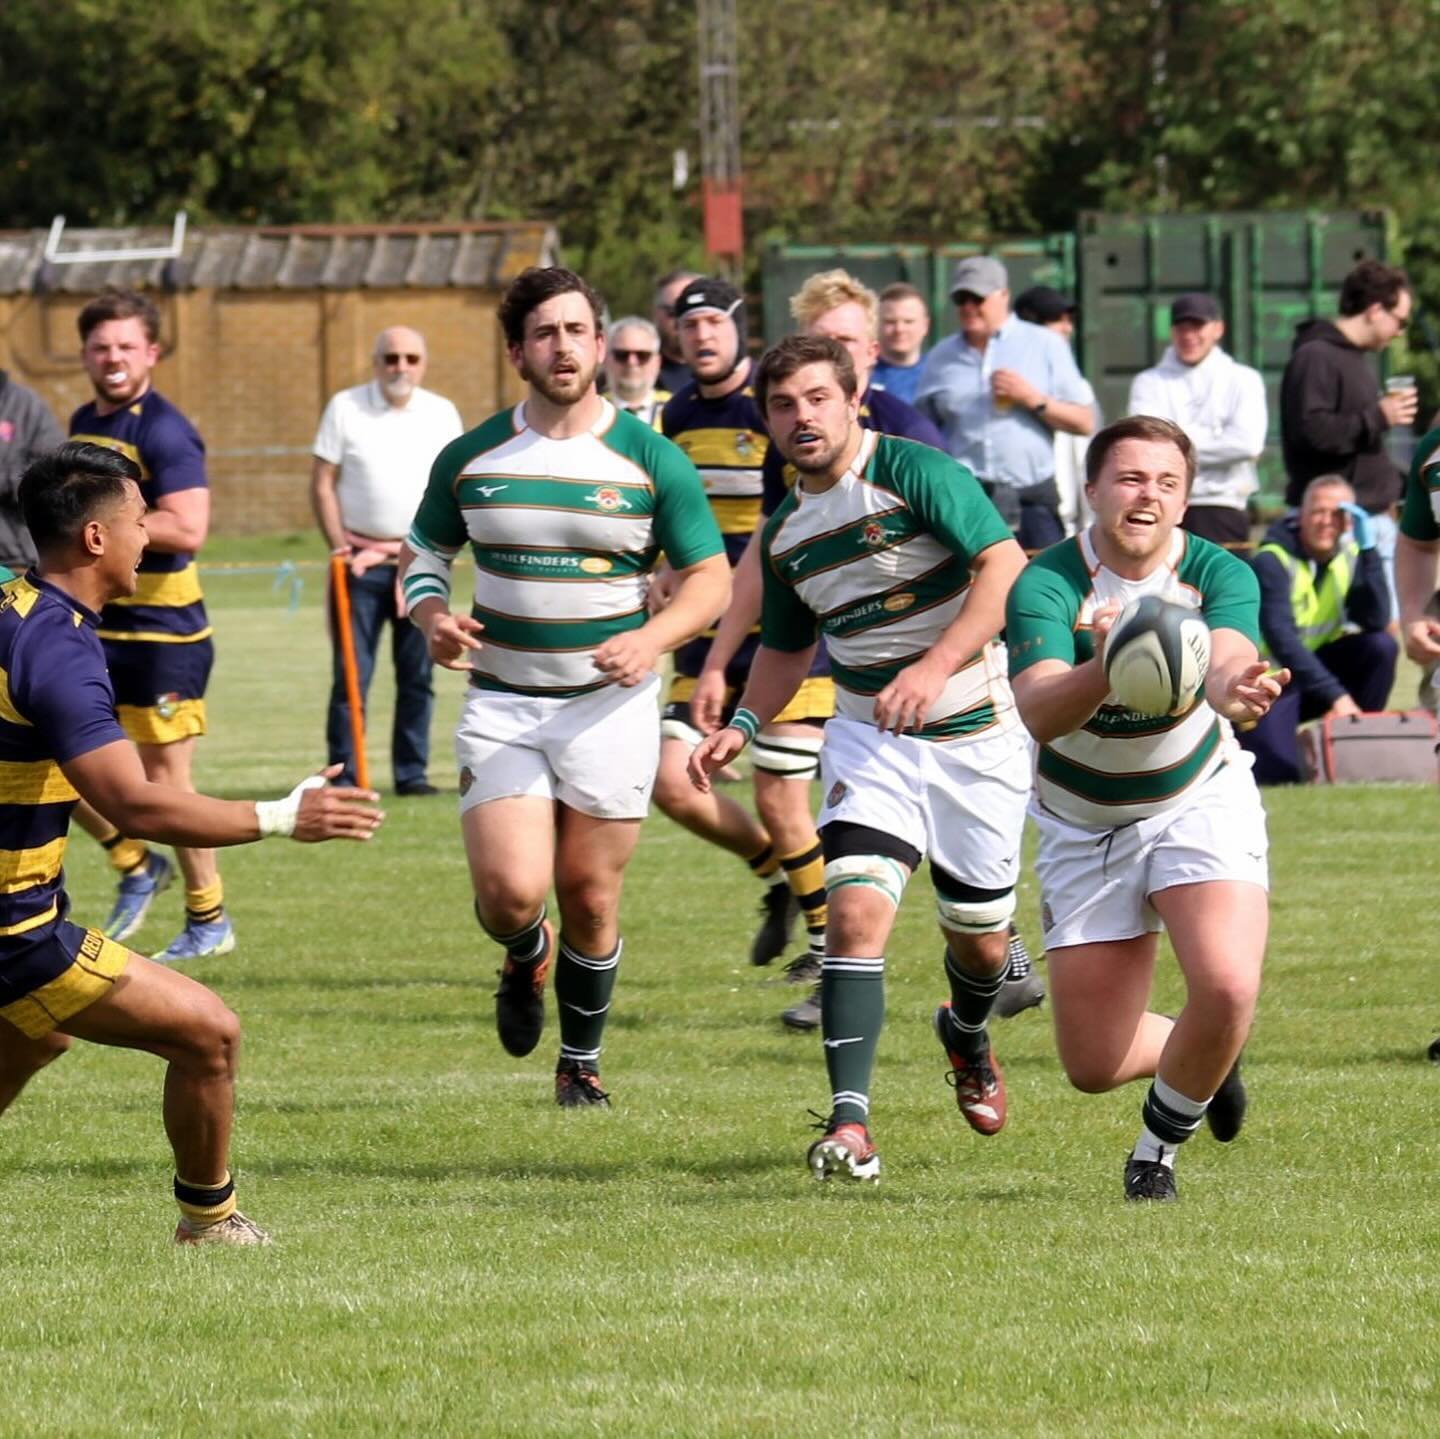 MATCH HIGHLIGHTS 📸

Some snaps from our 56-26 win over Burnham-on-Crouch! For full match report head to our website! We&rsquo;re on the road to glory now! 👑 

#bleedgreen #ealing #papajohnscup #rugbyunion